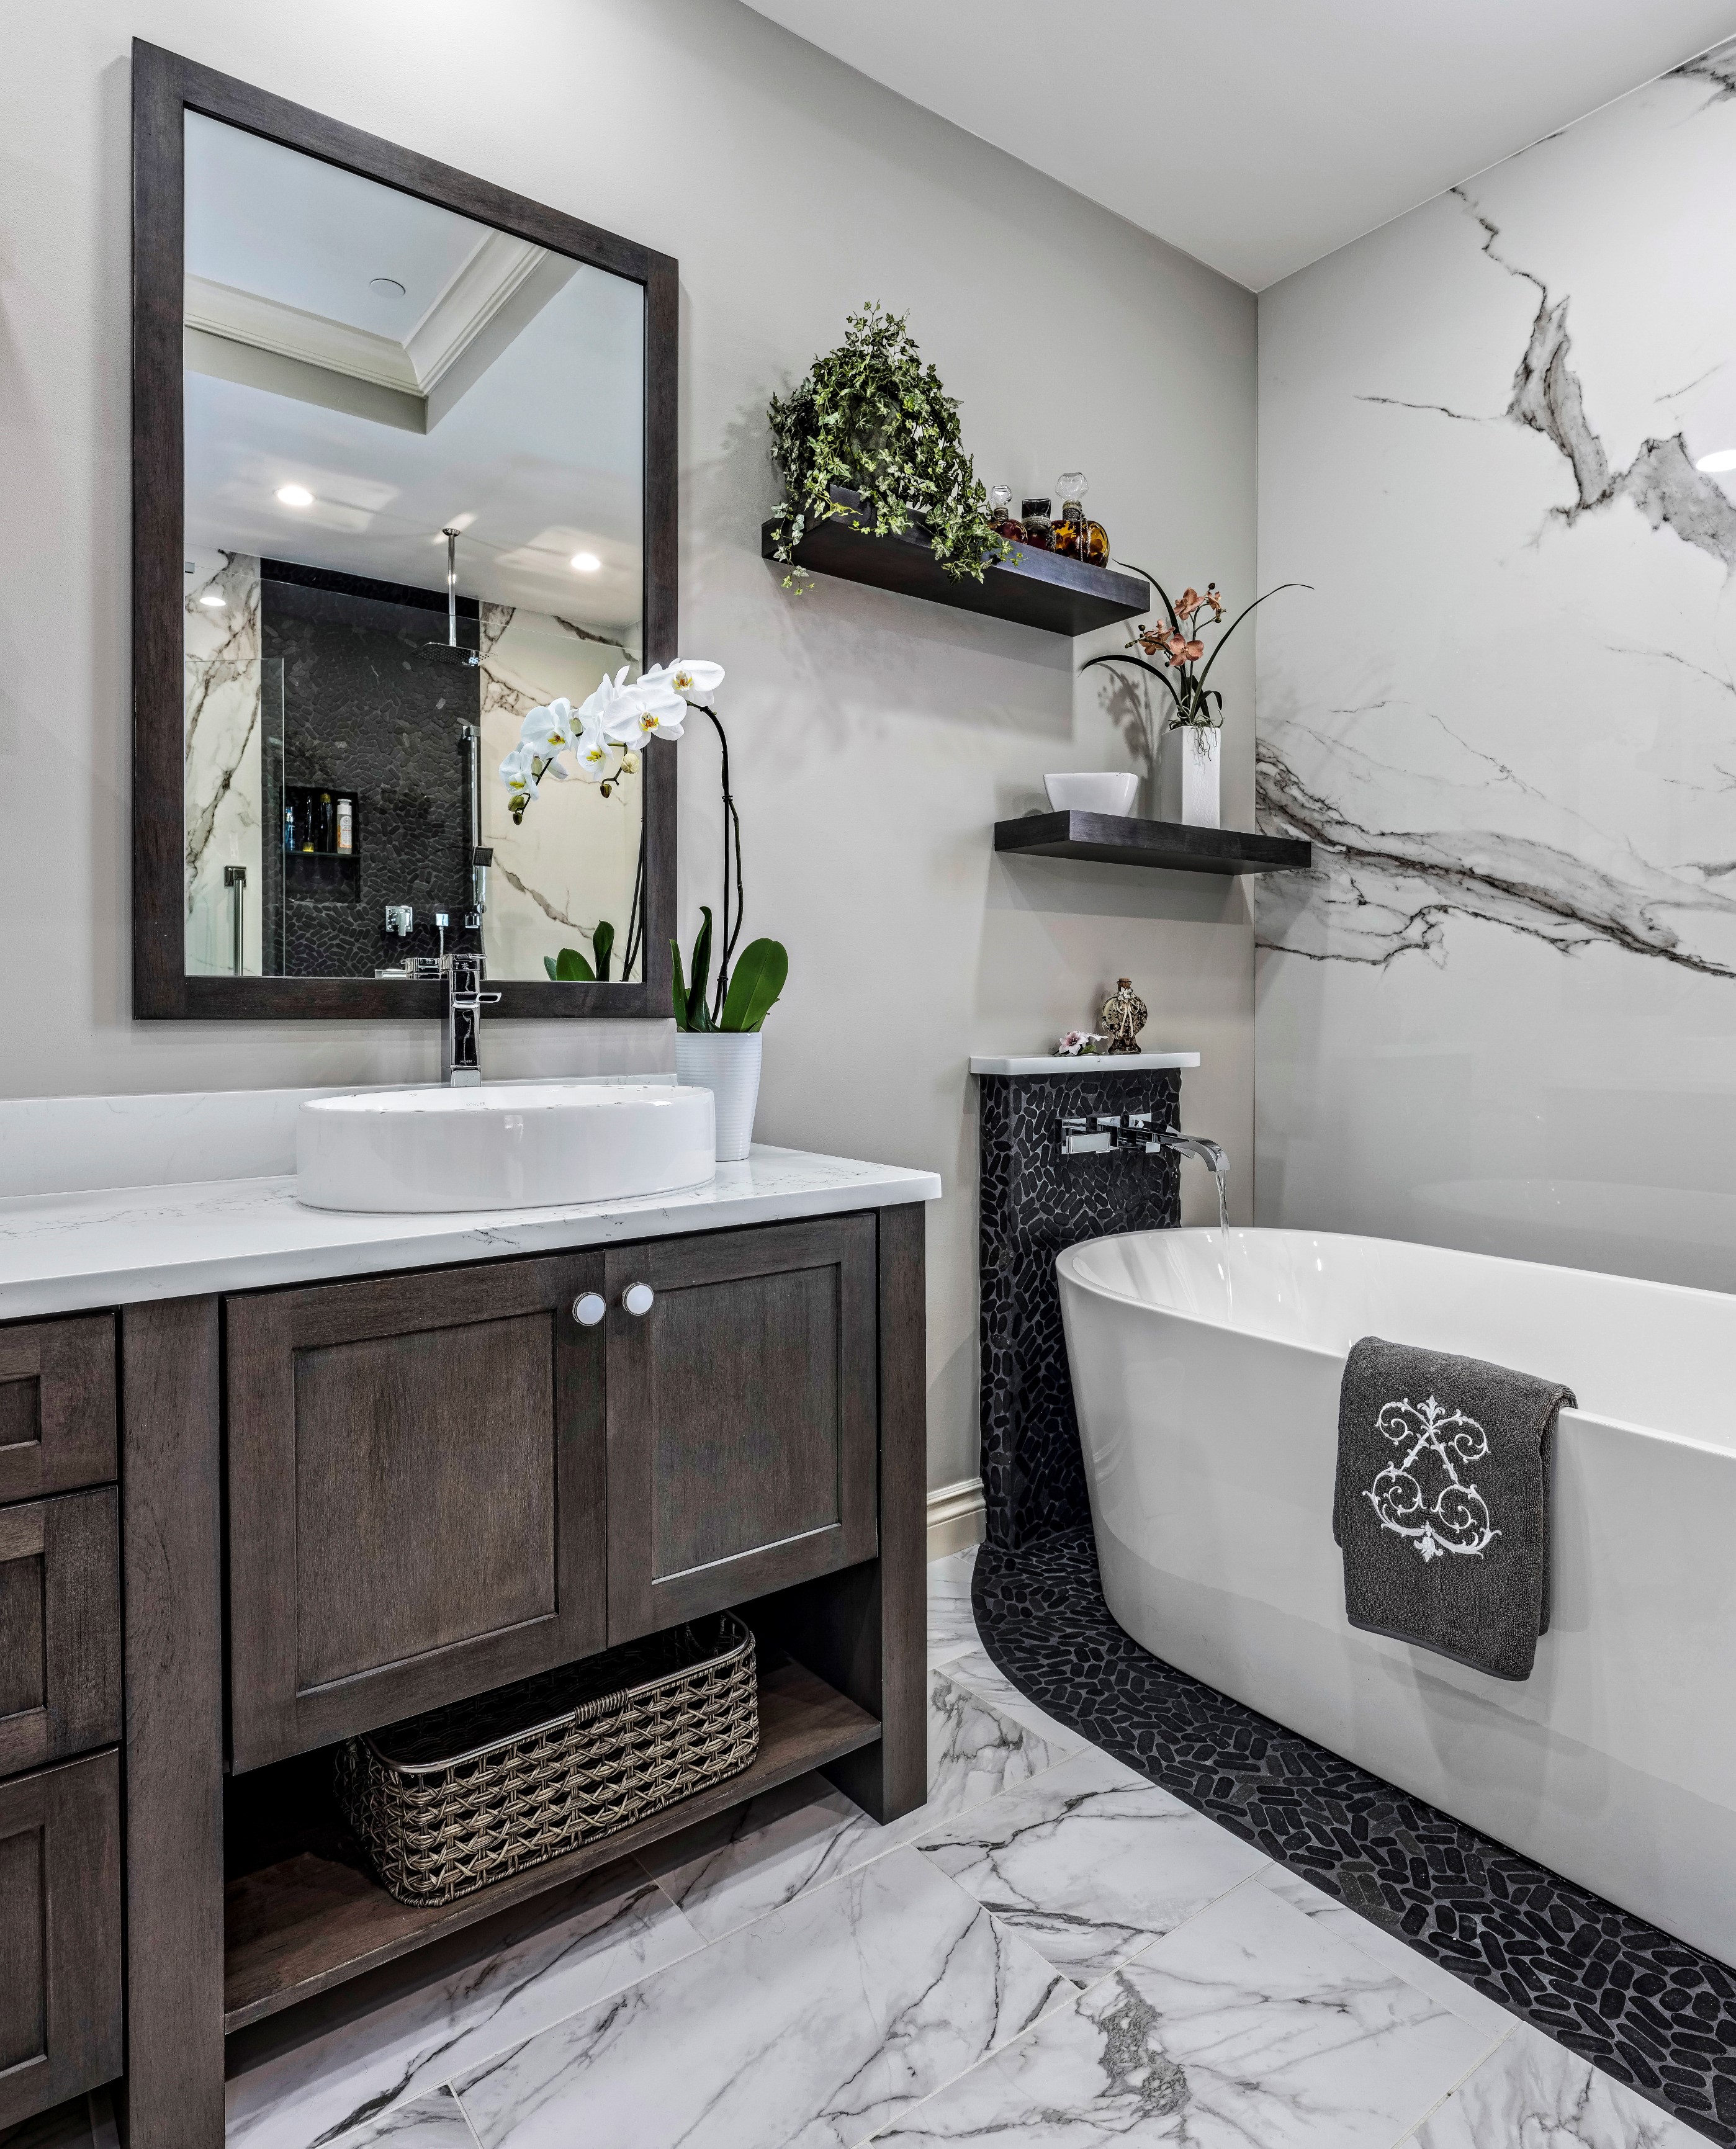 Bathroom Remodeling Typically Cost, Average Cost Of Remodeling A Bathroom